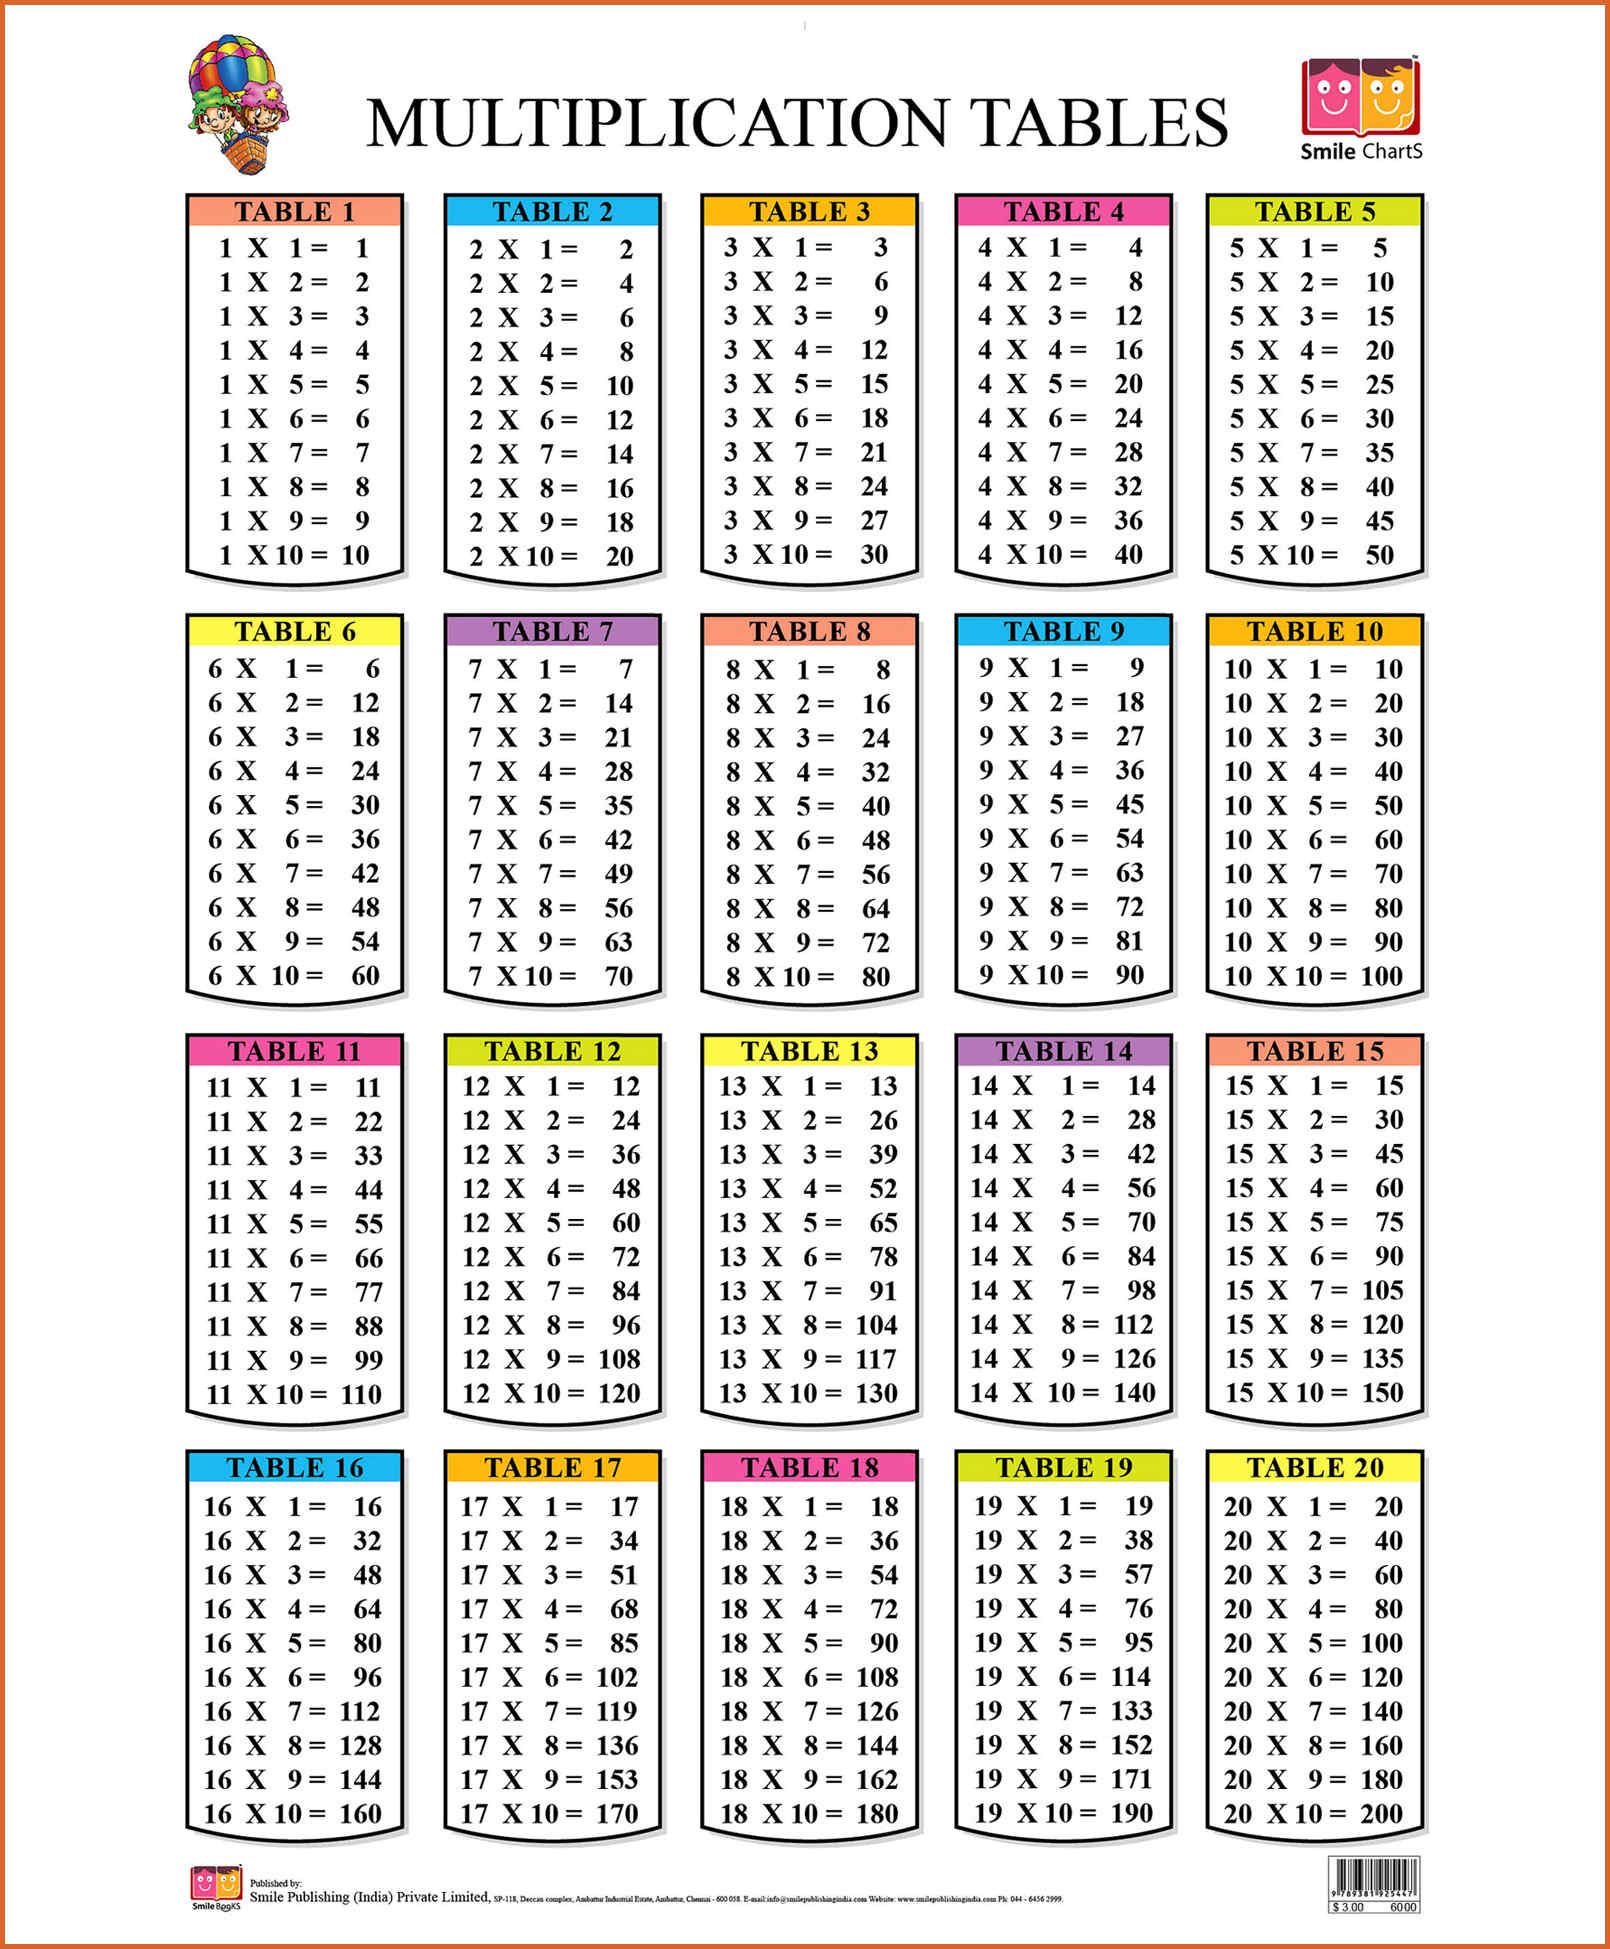 Multiplication Chart To 20 Luxury Math Tables 1 To 20 Photo Of Property 2017 New At Blank Multiplication. Multiplication Chart, Math Tables, Multiplication Table